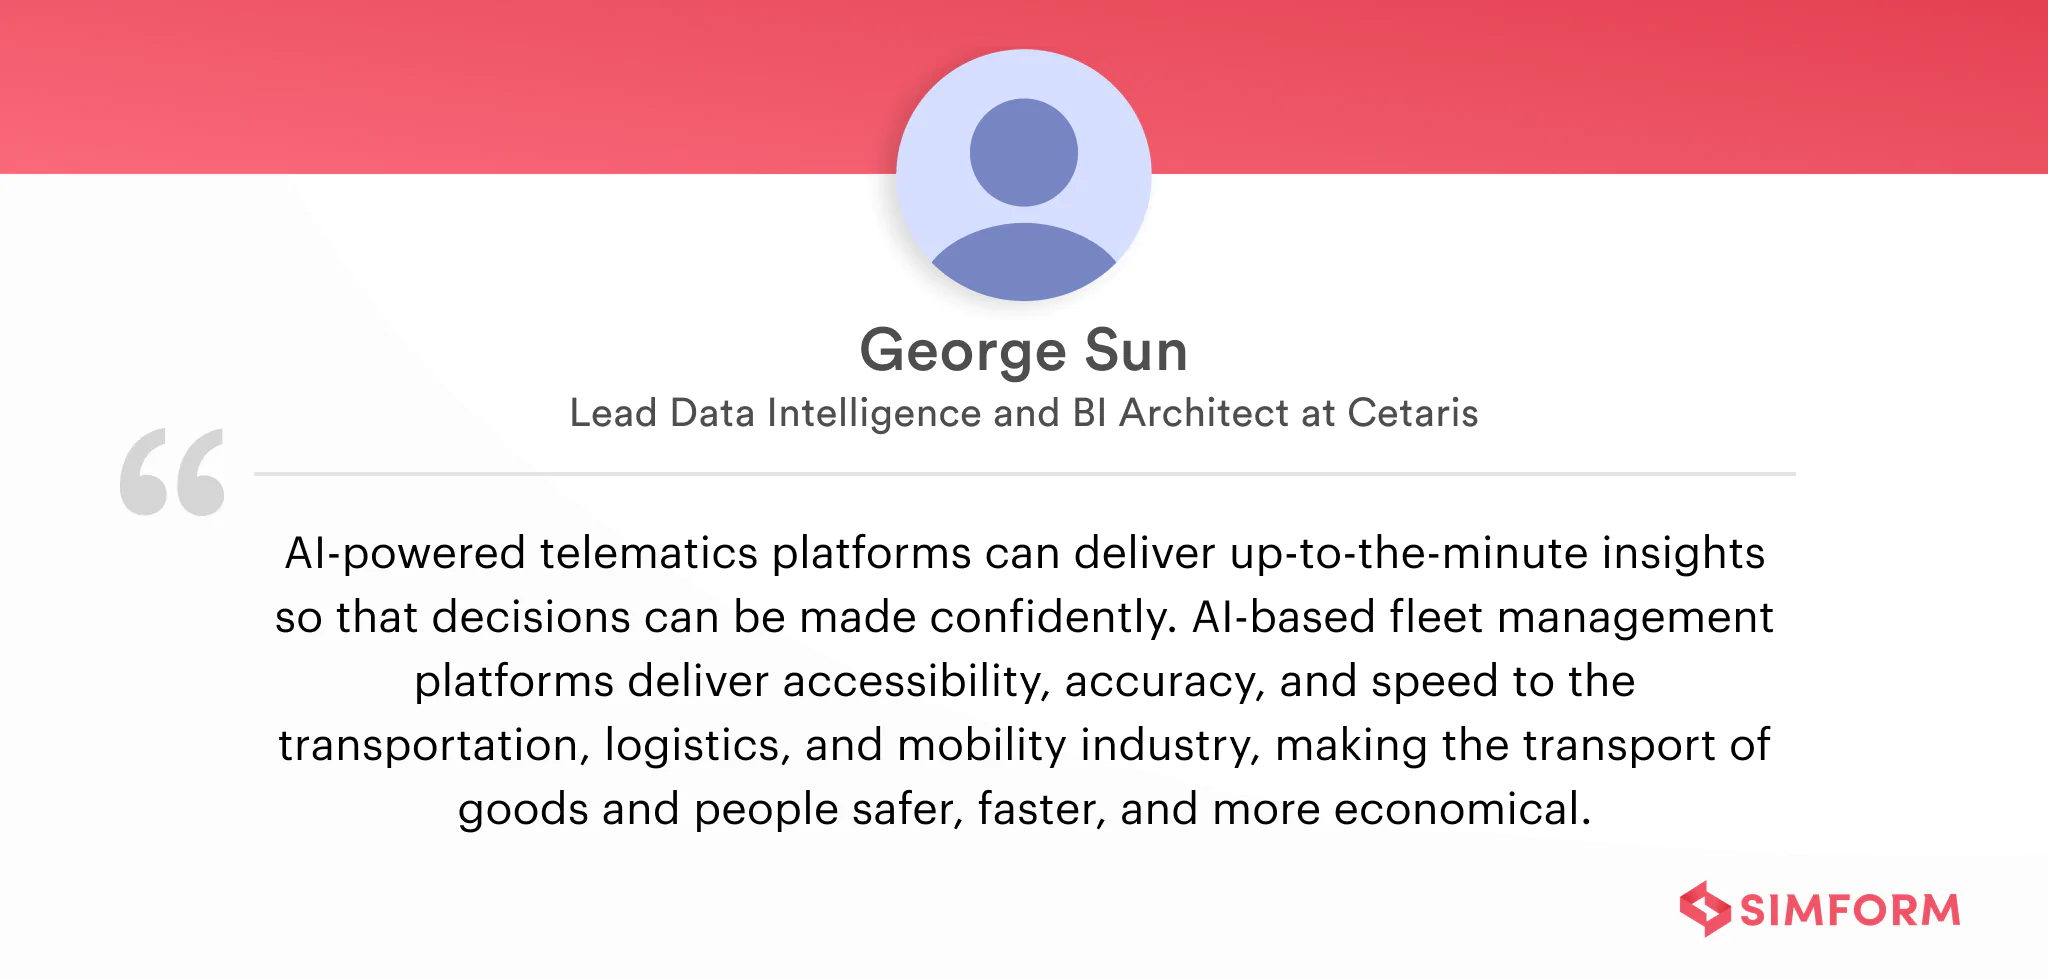 George Sun on using AI for Fleet management